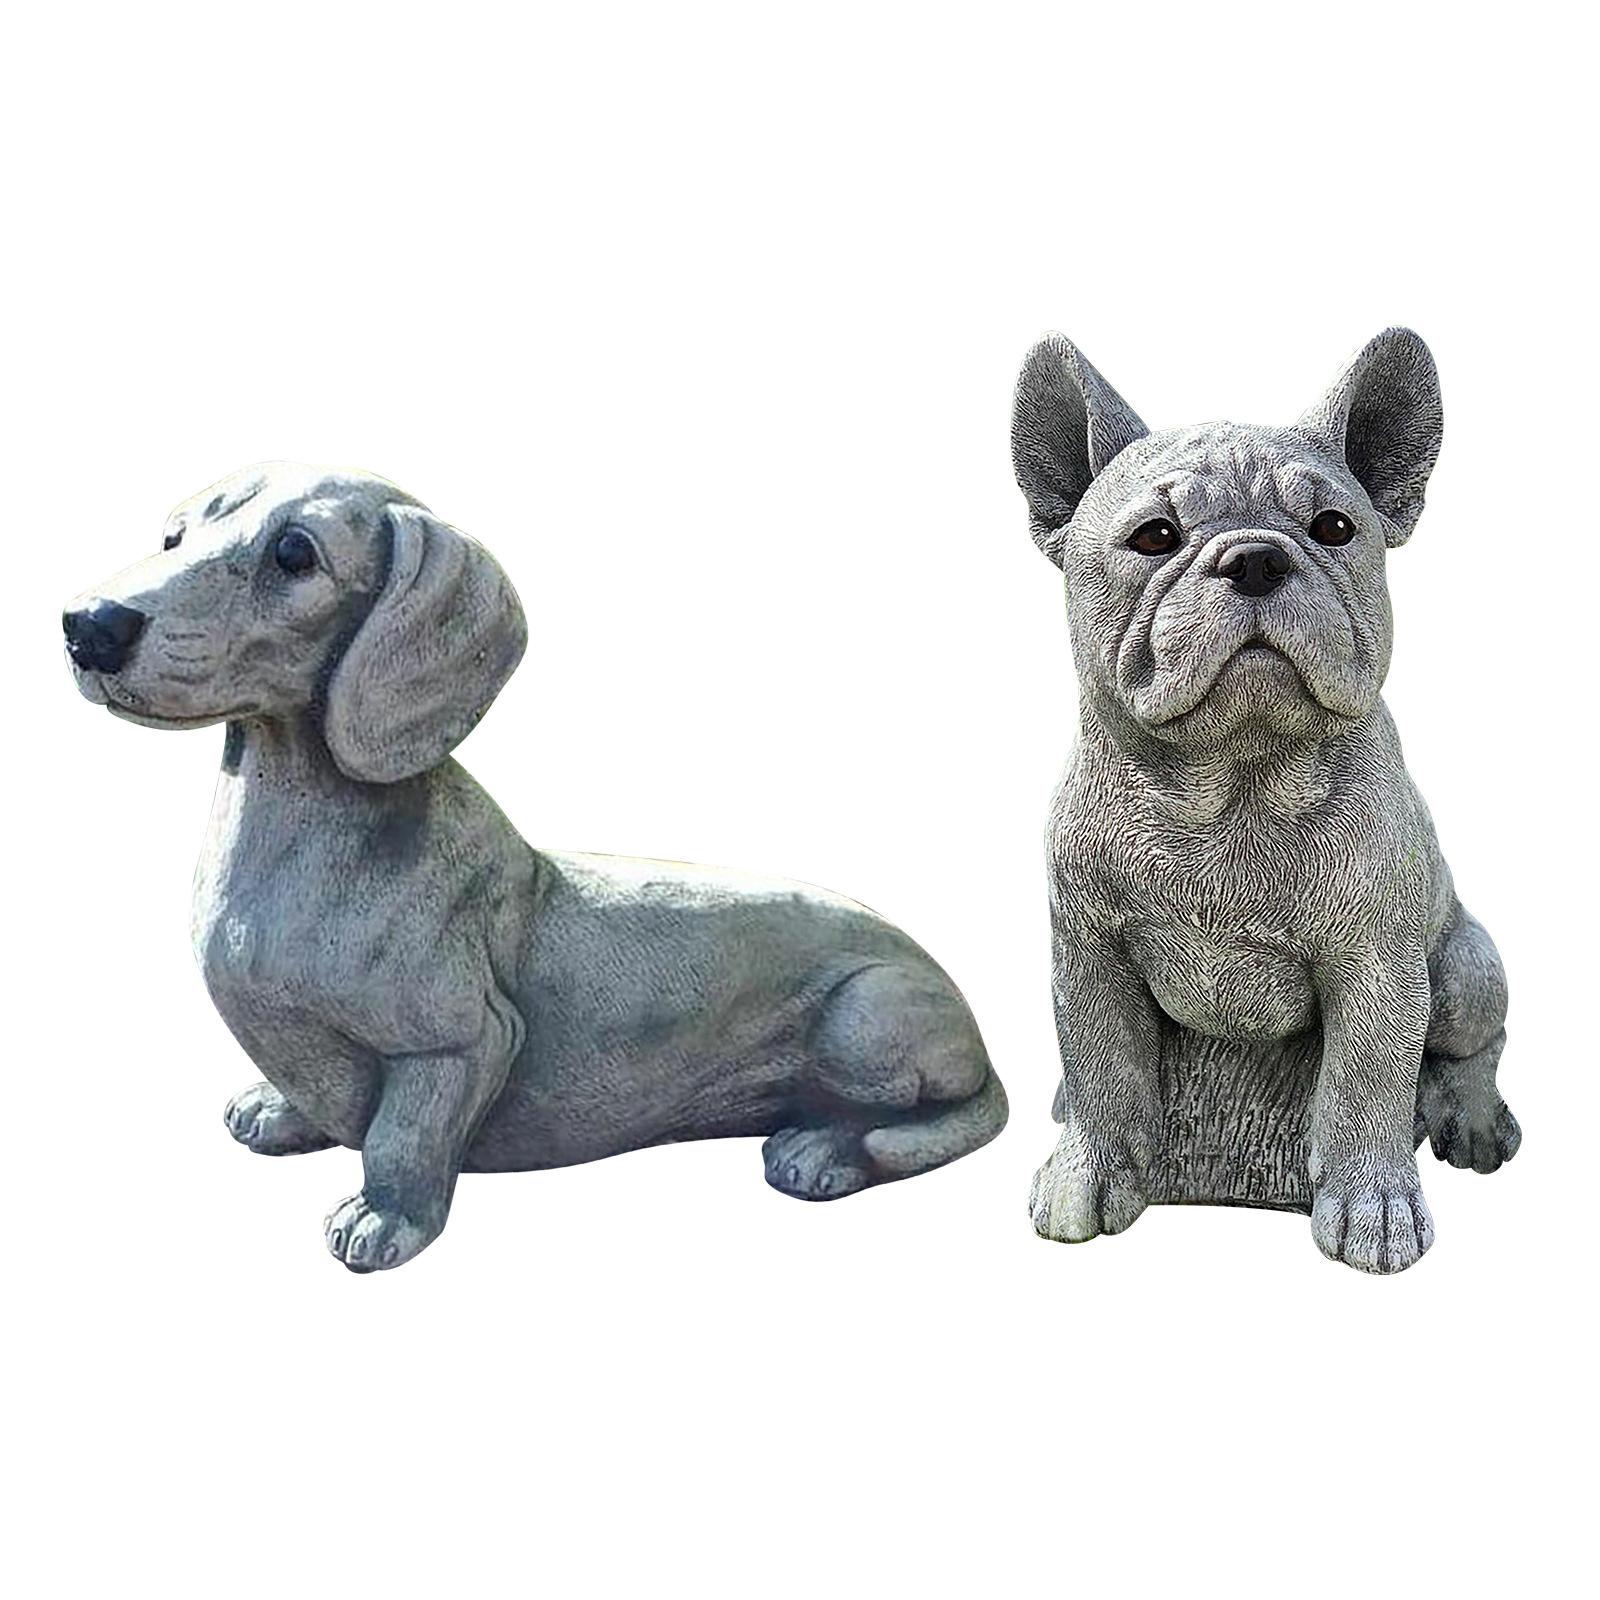 A resin dog statue can add a playful and charming touch to any garden or yard. These statues are made from durable and weather-resistant materials, making them a long-lasting and low-maintenance decoration. Whether placed on a lawn, patio, or garden bed, a resin dog statue can be an eye-catching focal point that brings joy to both pet owners and visitors alike.